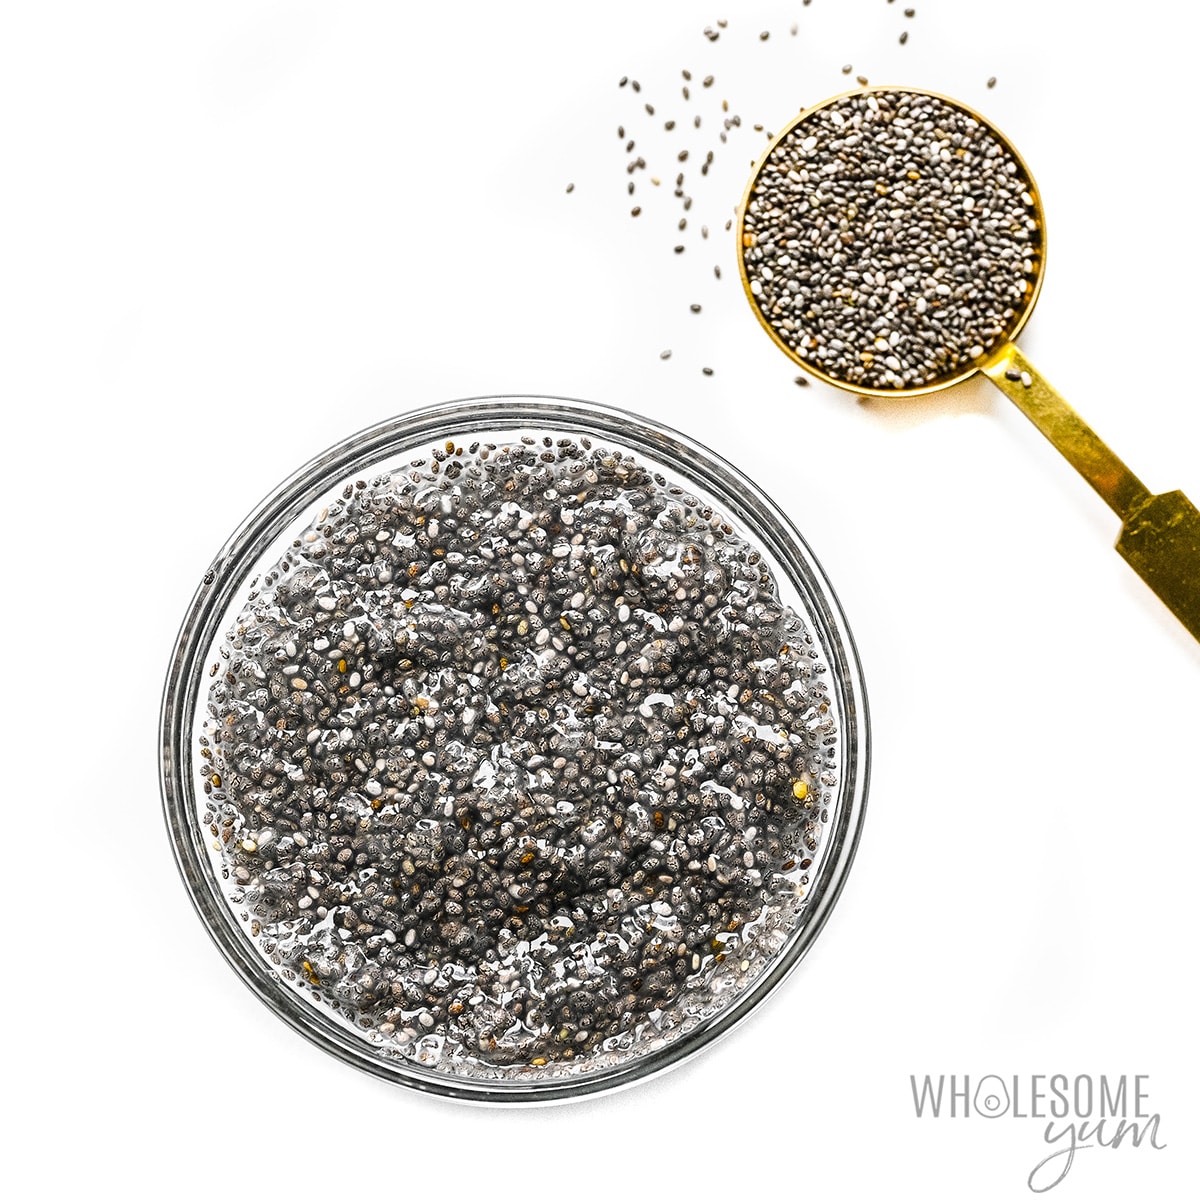 Chia seeds in a bowl next to measuring spoon.